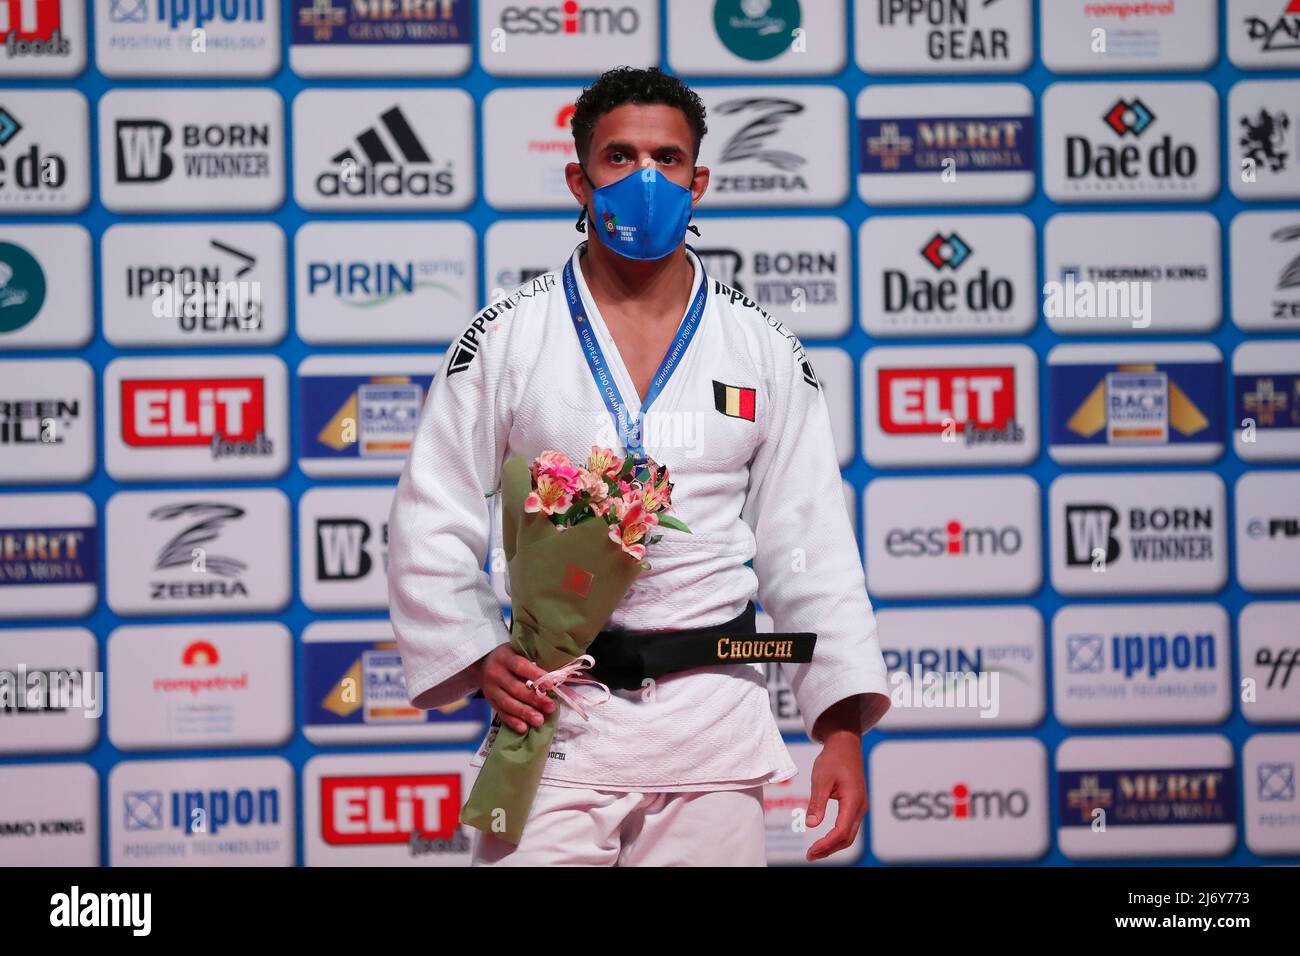 Sofia, Bulgaria, 30th April 2022. Sami Chouchi of Belgium posing with  bronze medal during the medal ceremony in the -81kg during the European  Judo Championships 2022 at Armeets Arena in Sofia, Bulgaria.